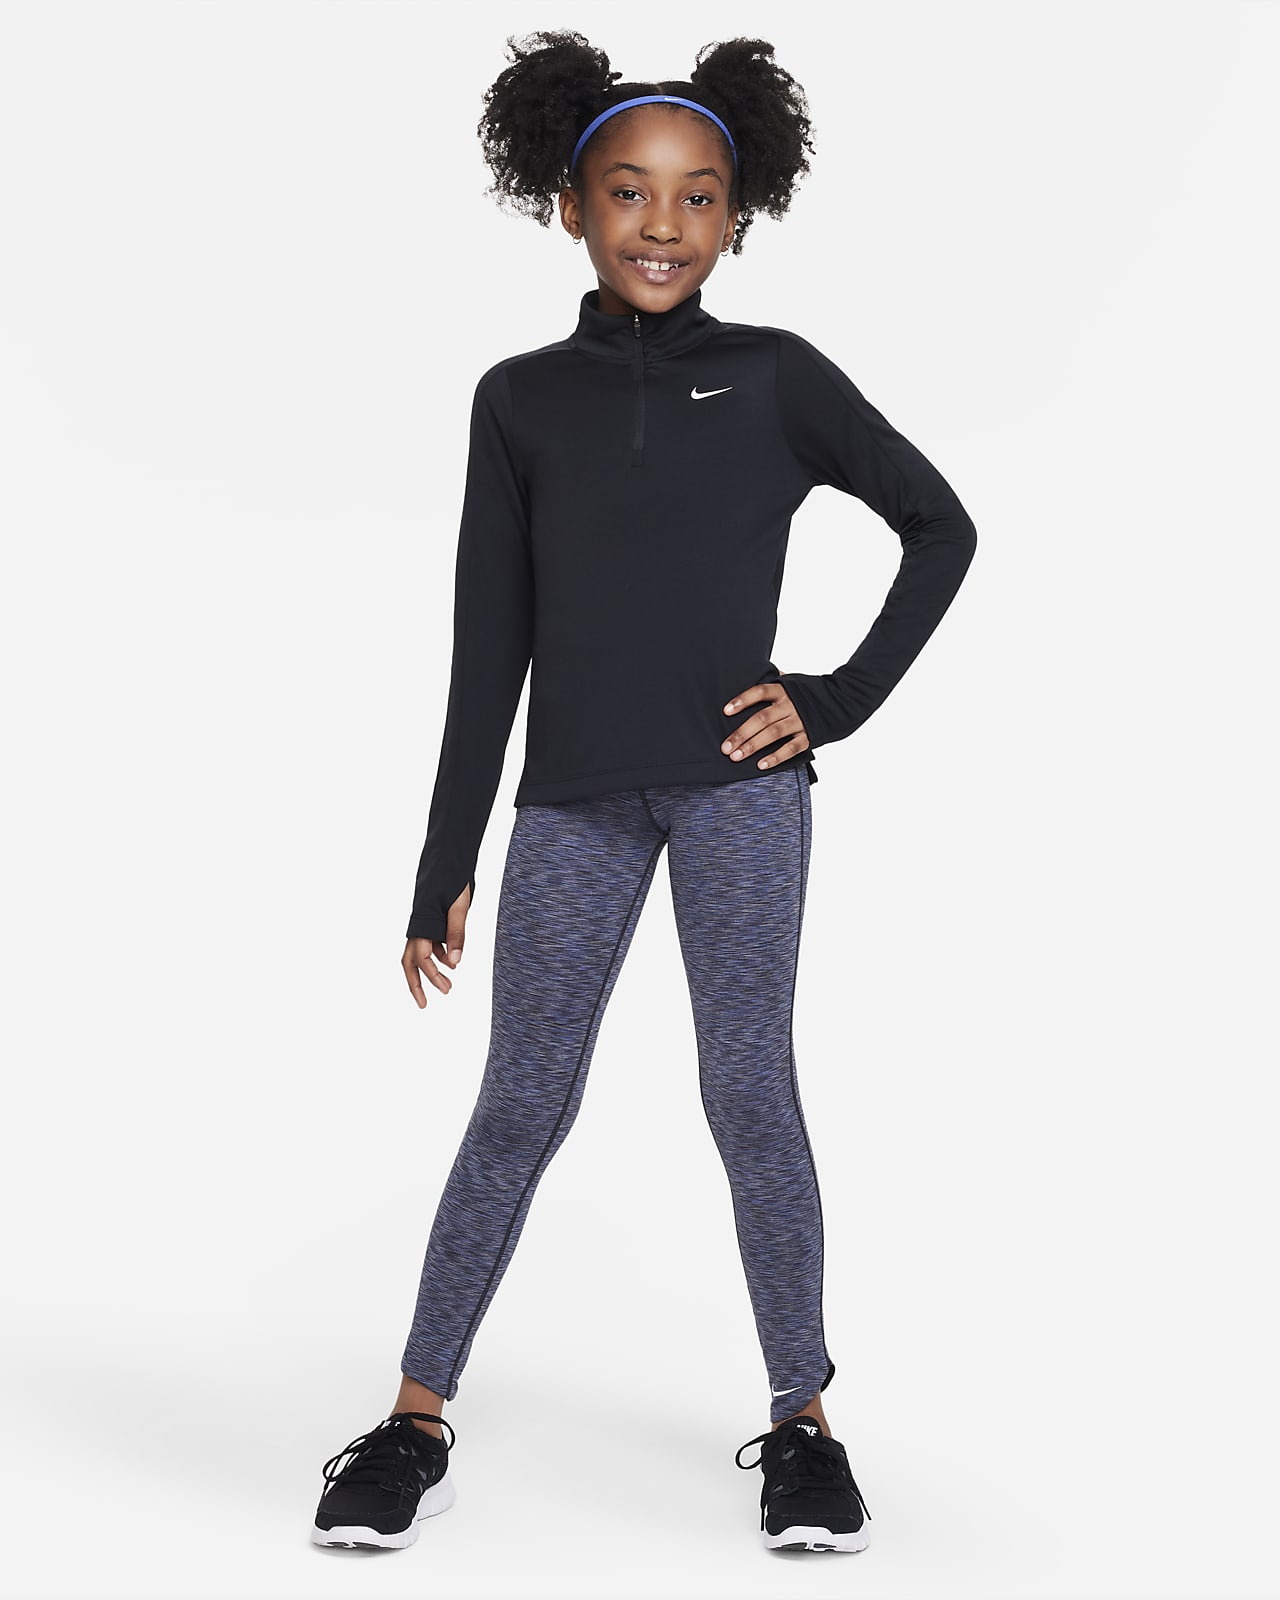  Nike Women's Tennis One Luxe Tight : Clothing, Shoes & Jewelry